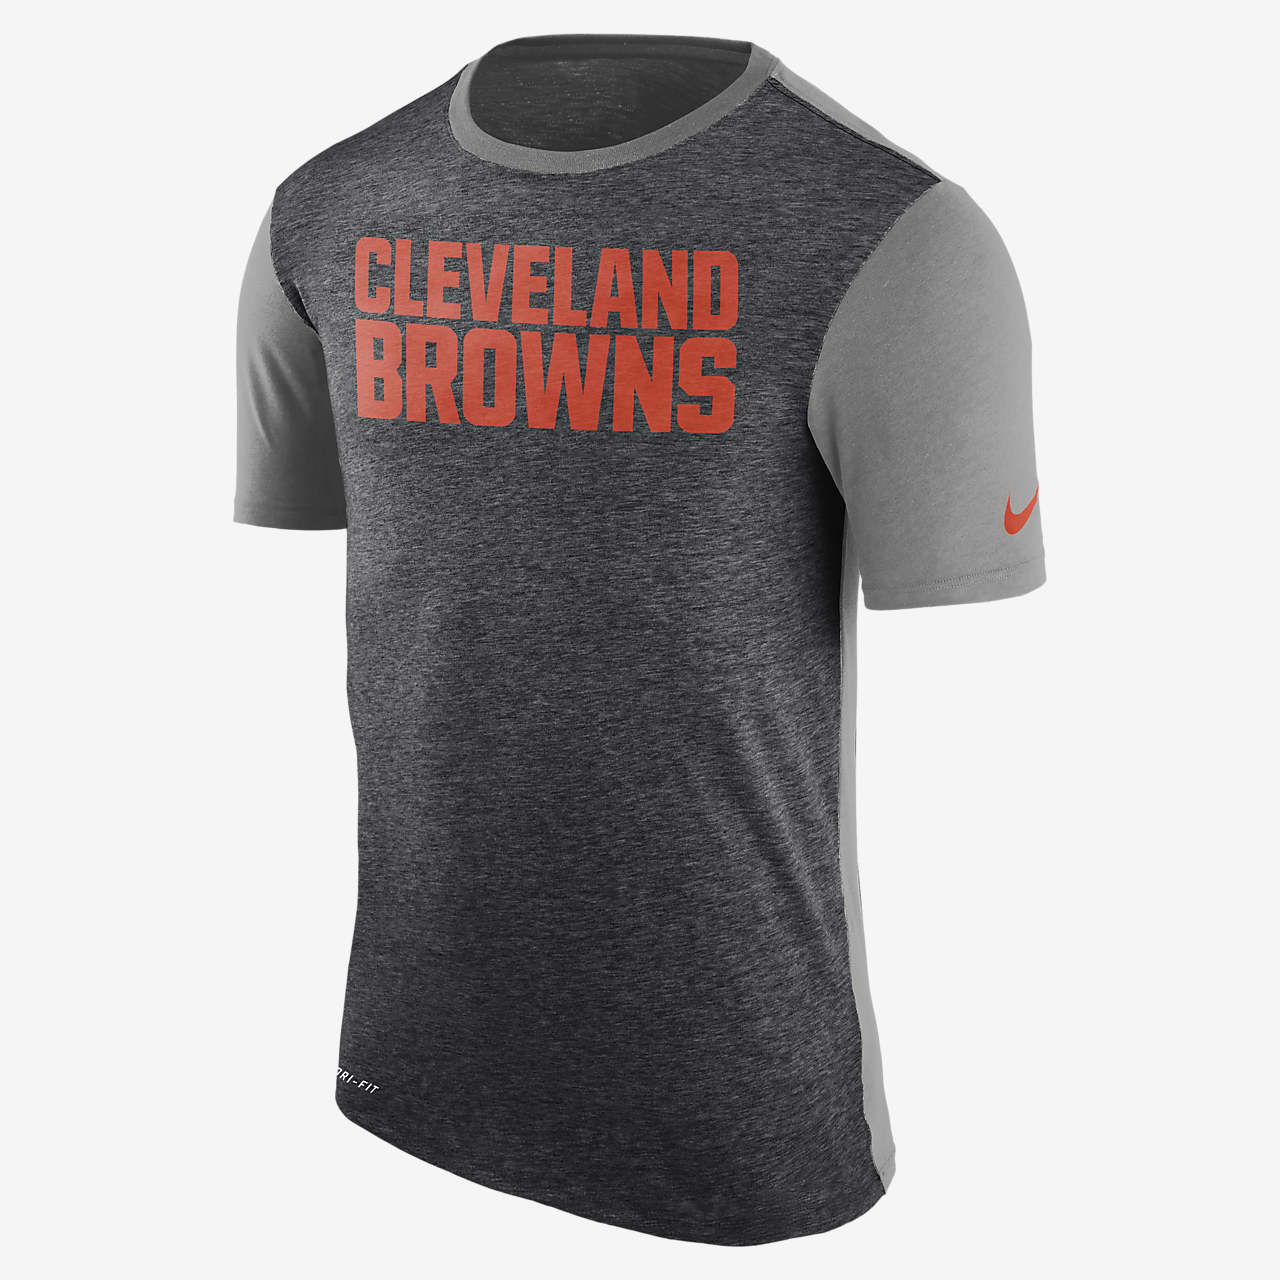 Tee-shirt Nike Dry Color Dip (NFL Browns) pour Homme